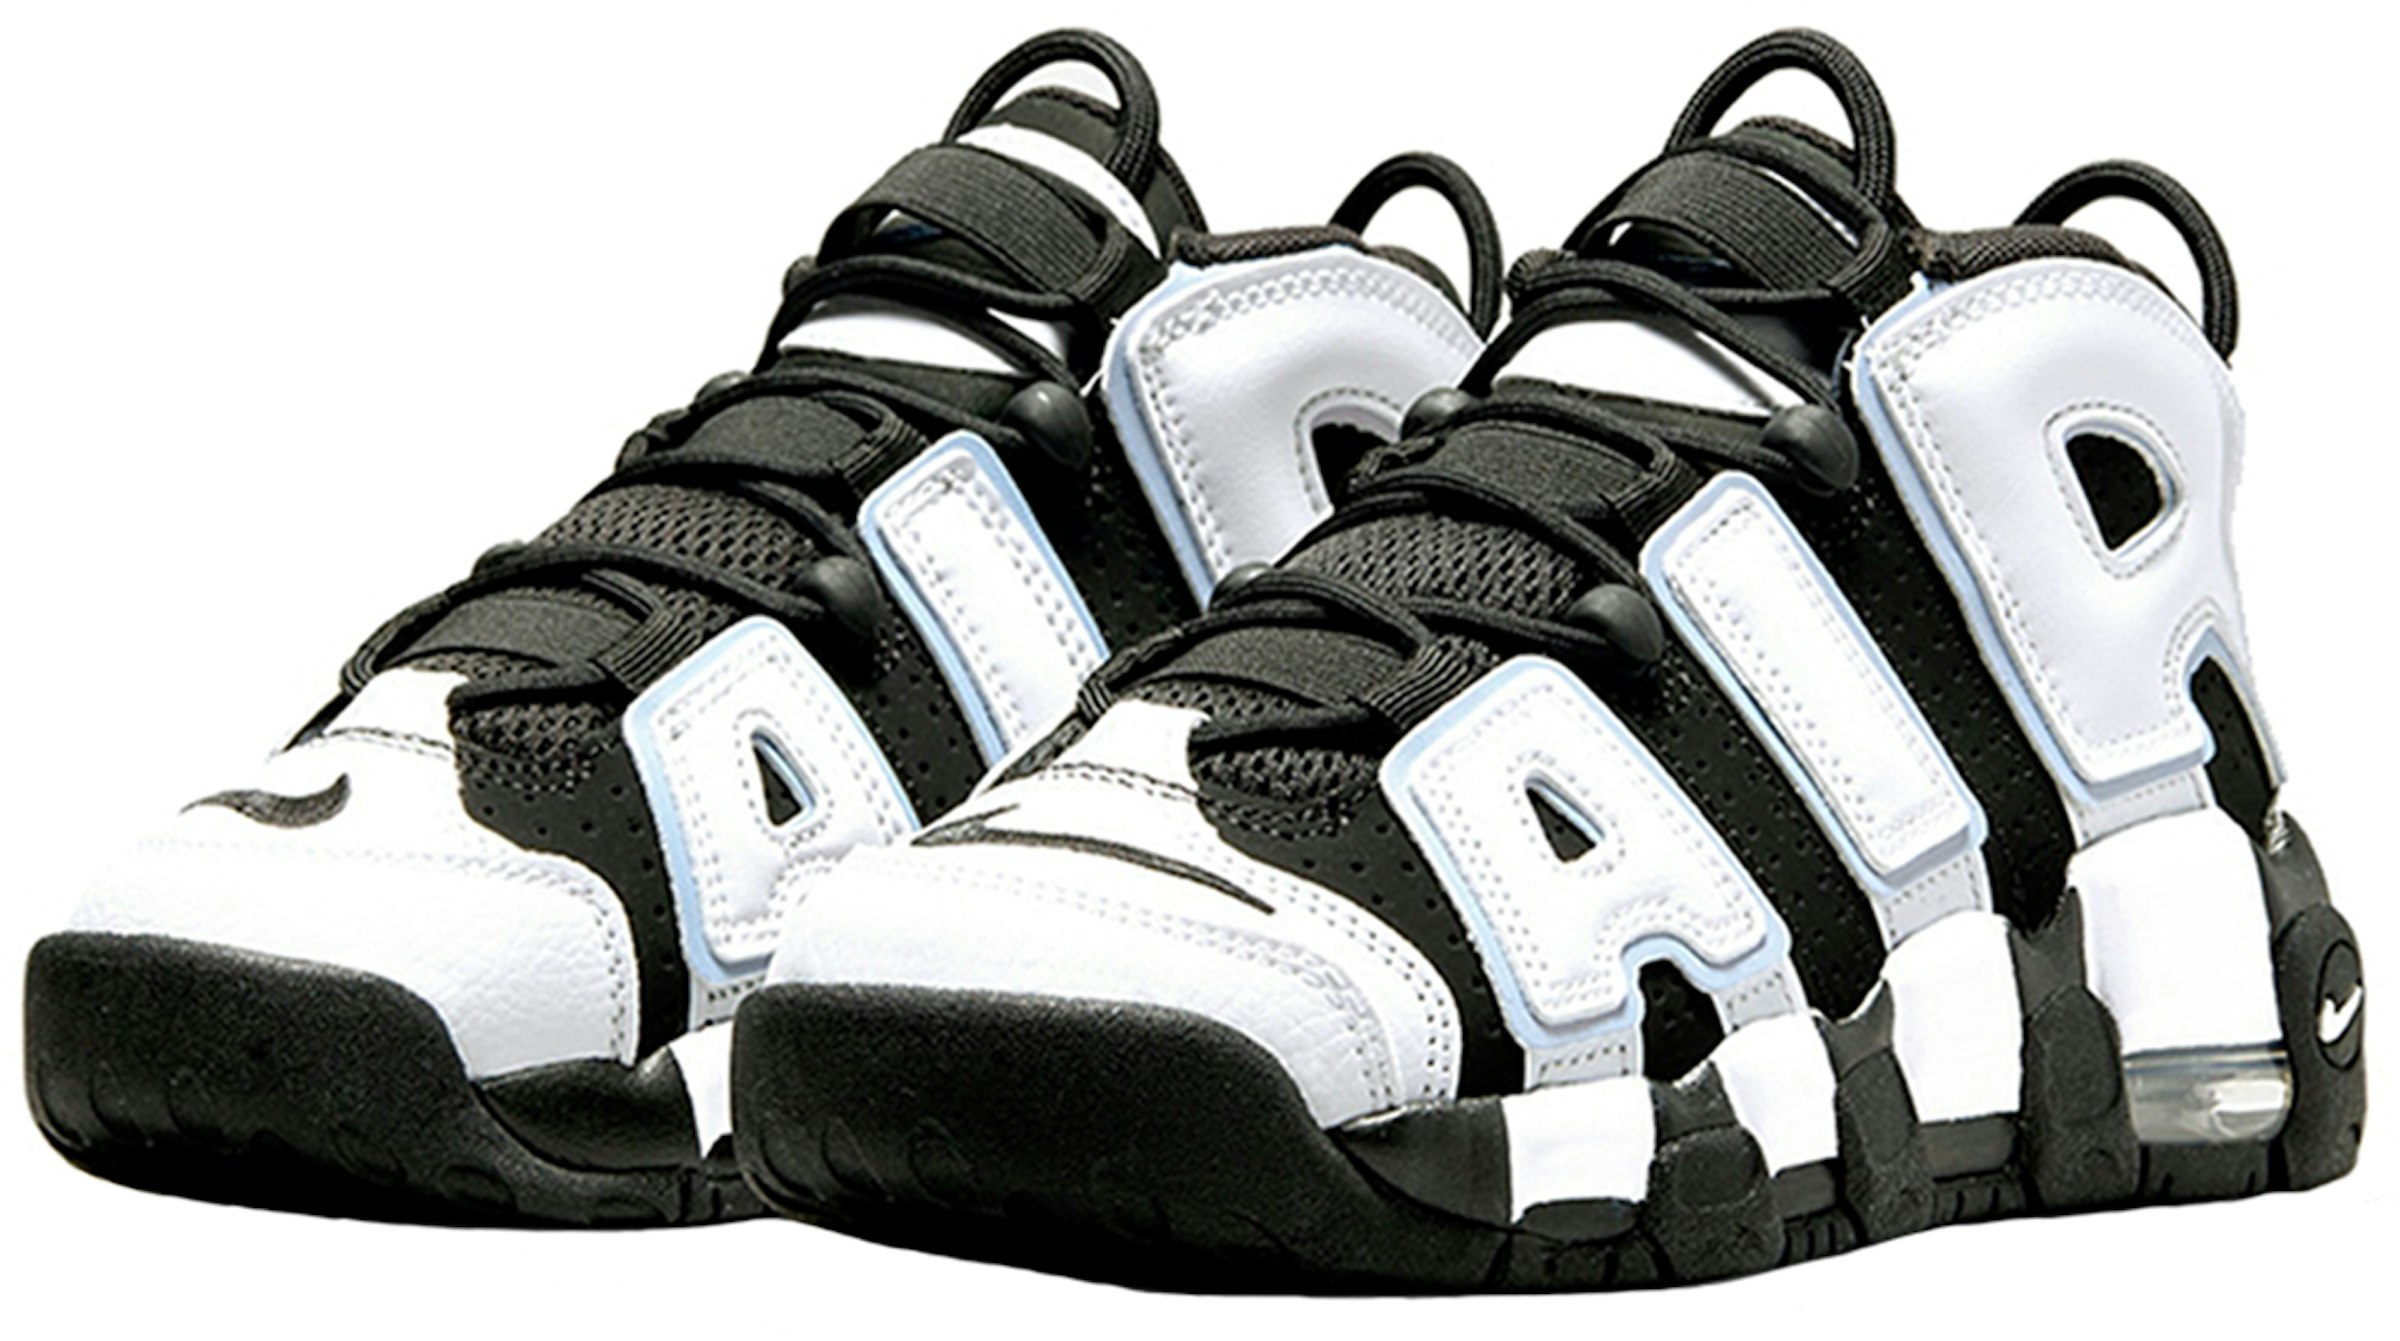 Categoría canto mucho Nike Air More Uptempo 96 Cobalt Bliss (GS) Kids' - DQ6200-001 - US